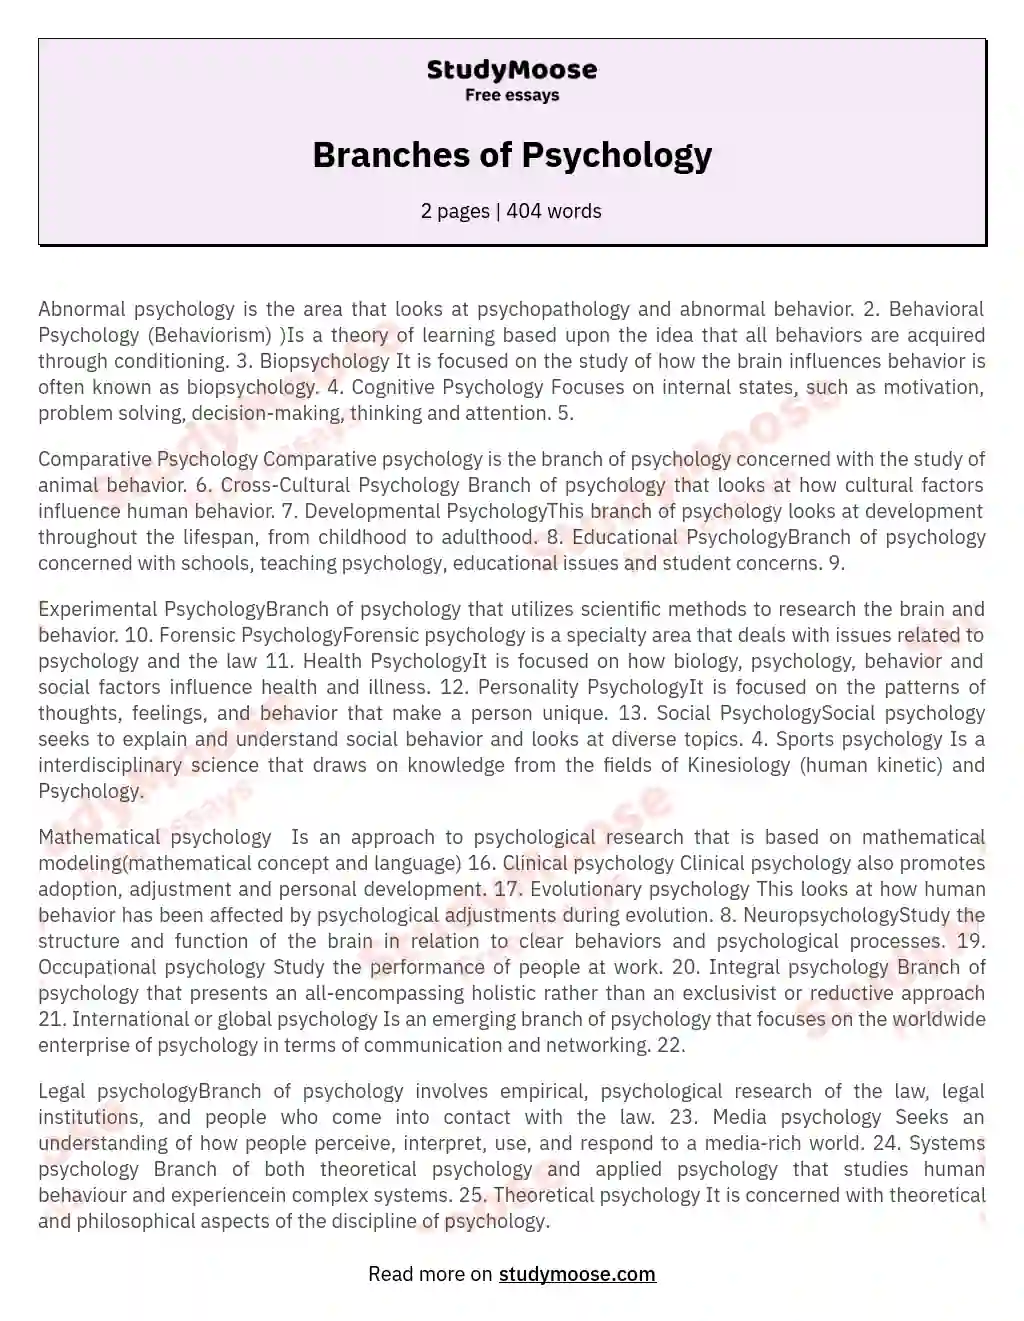 Branches of Psychology essay